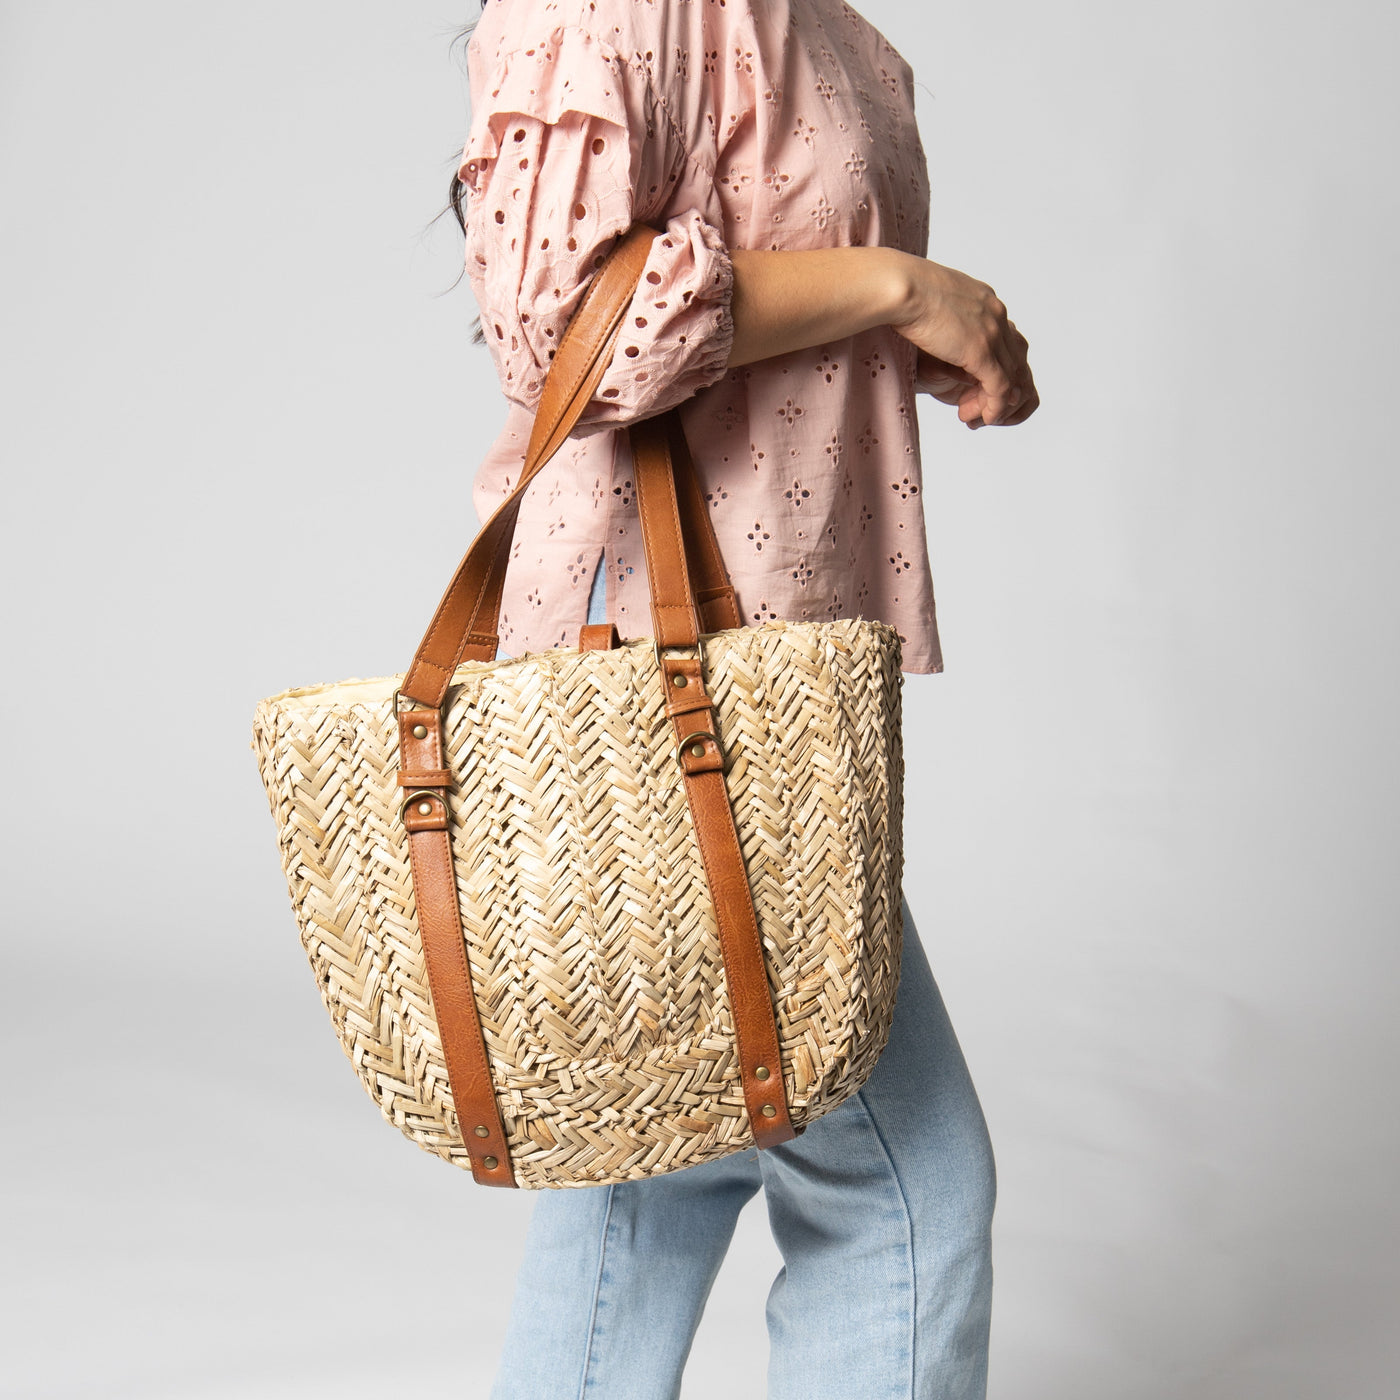 TOTE - The Jolie Everyday Tote